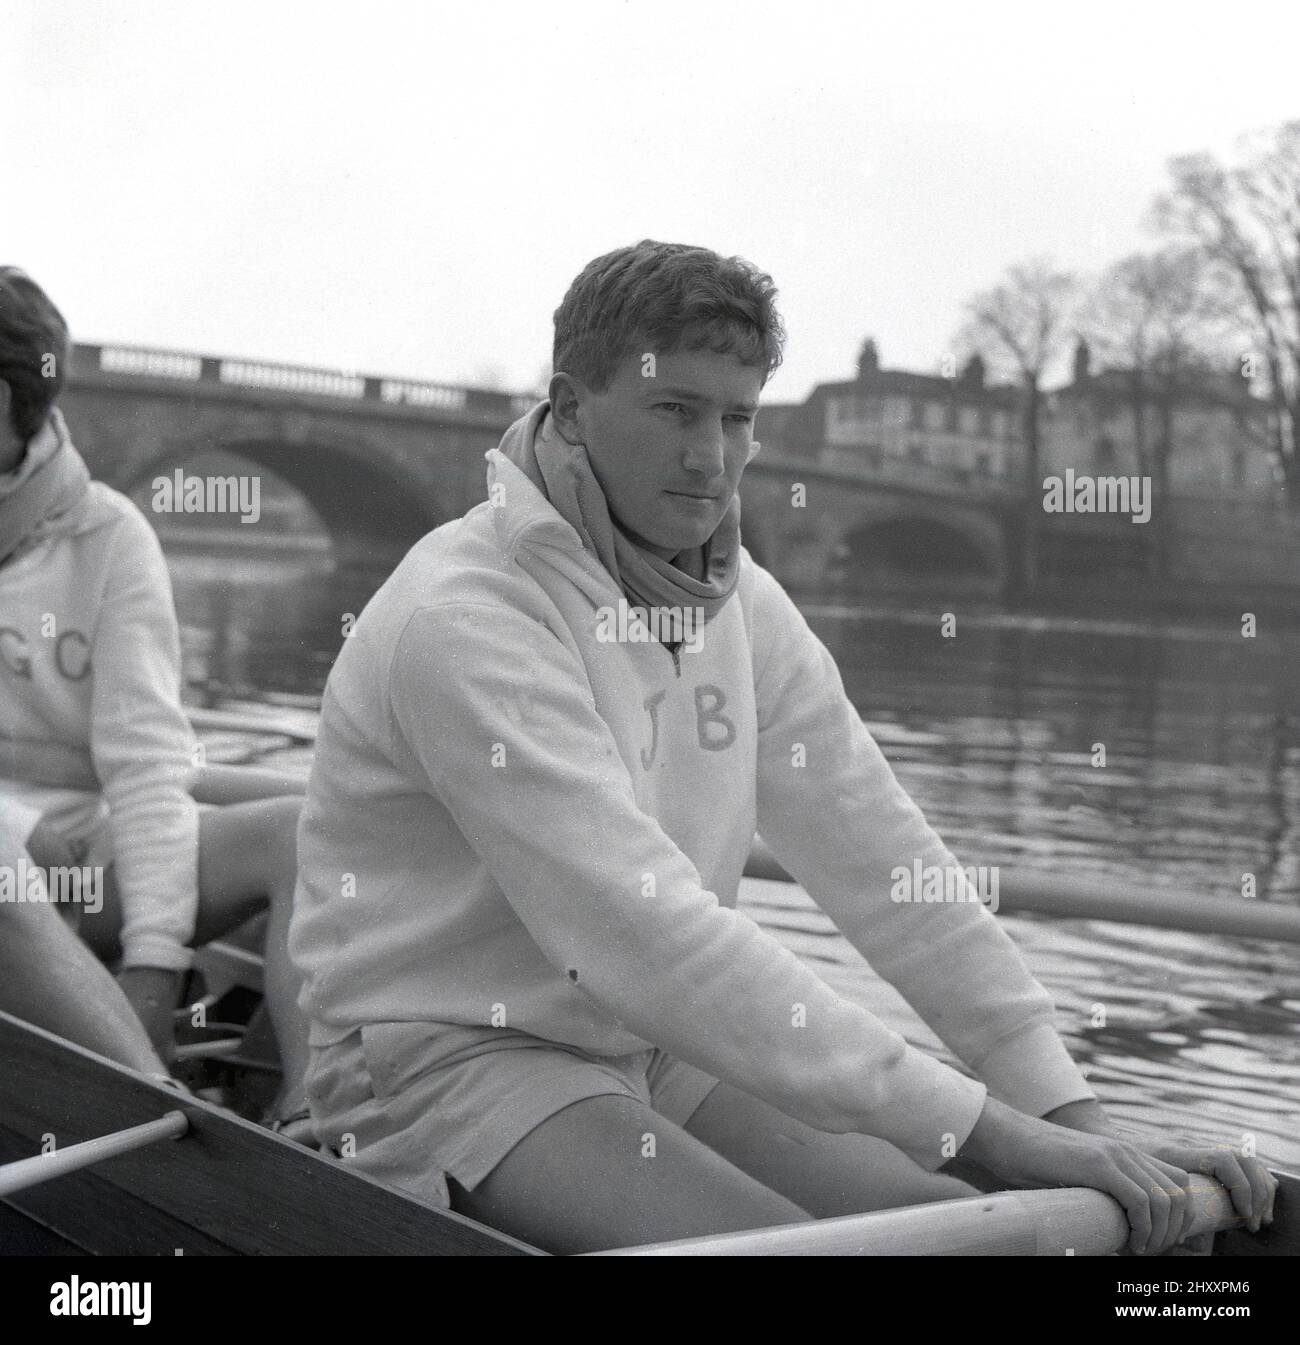 1960, historical, sitting in a rowing boat on the water, crew member of the Cambridge University Boat team, J. Beveridge of Jesus college, with JB embrodied on his cotton tracksuit top. This was the third appearance of John Beveridge in the race and he was the Cambridge president this year. The famous university rowing race, The Oxford & Cambridge Boat Race, first took place 1829 and is a yearly event on the River Thames on the championship course between Putney and Barnes in South West London. Stock Photo